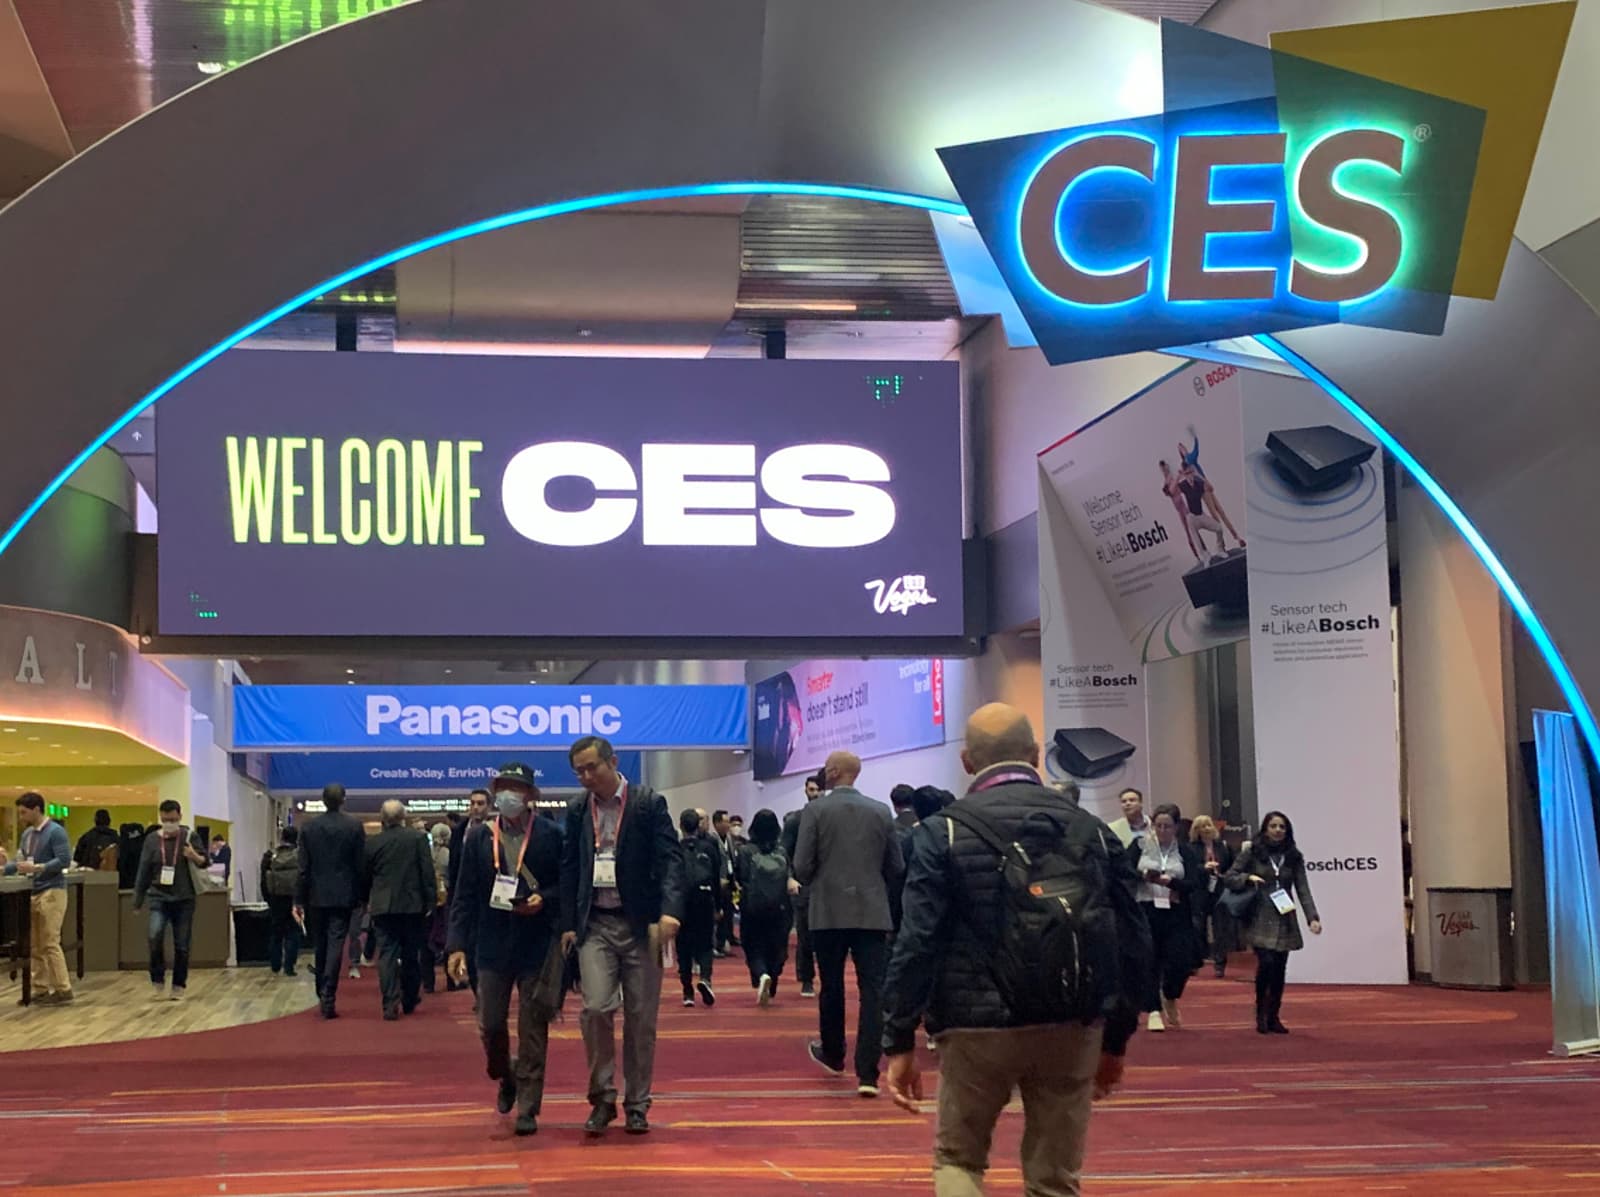 Welcome to CES sign